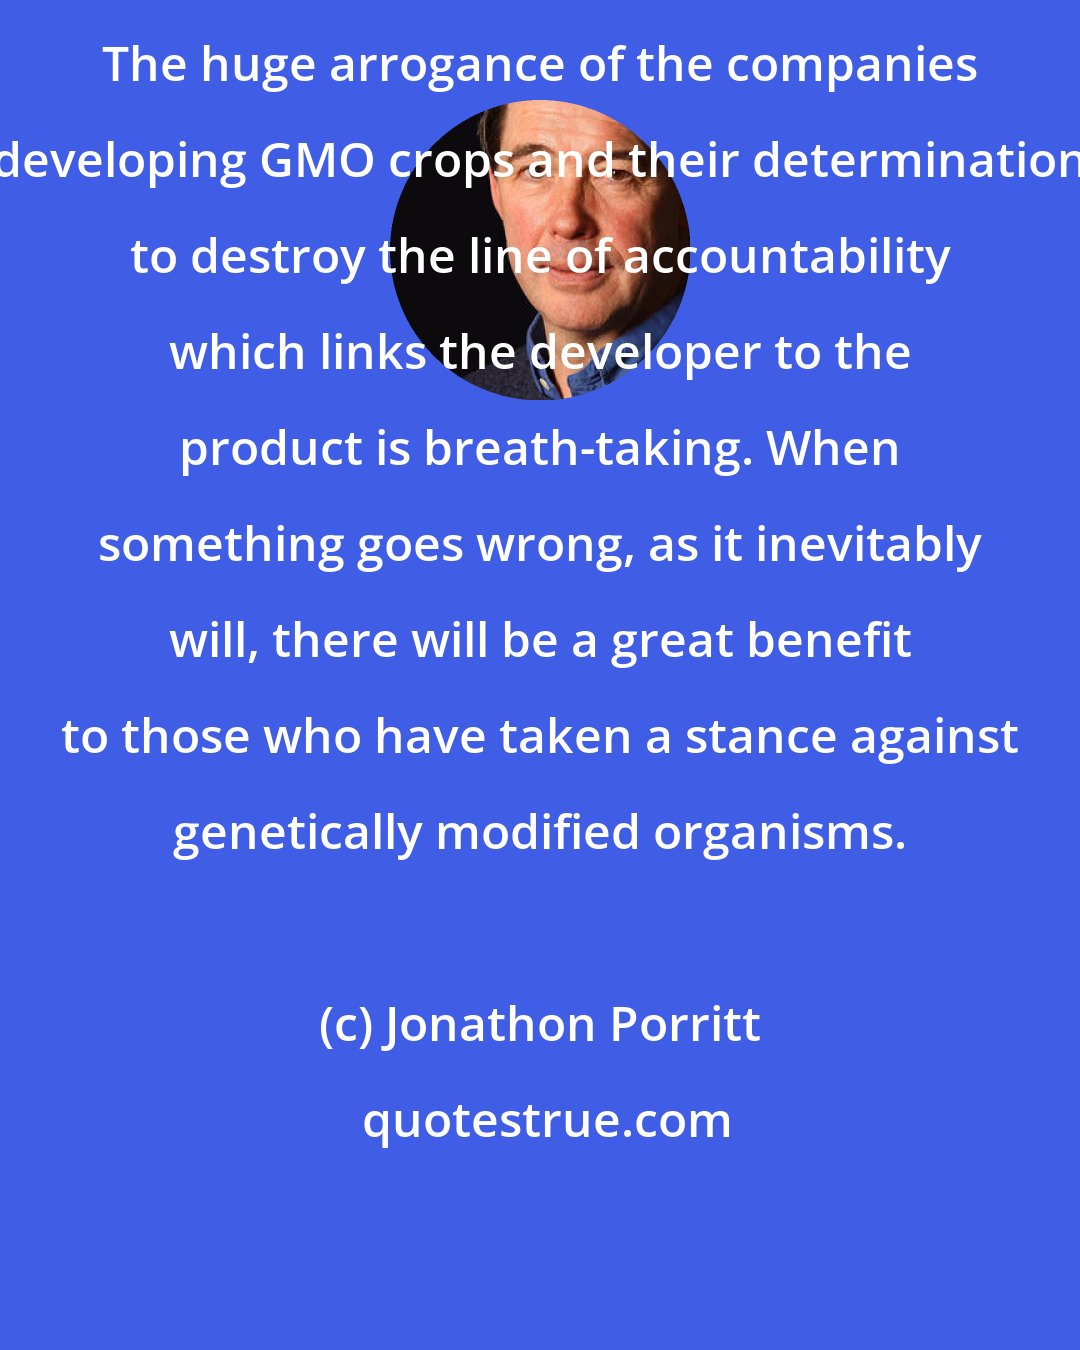 Jonathon Porritt: The huge arrogance of the companies developing GMO crops and their determination to destroy the line of accountability which links the developer to the product is breath-taking. When something goes wrong, as it inevitably will, there will be a great benefit to those who have taken a stance against genetically modified organisms.